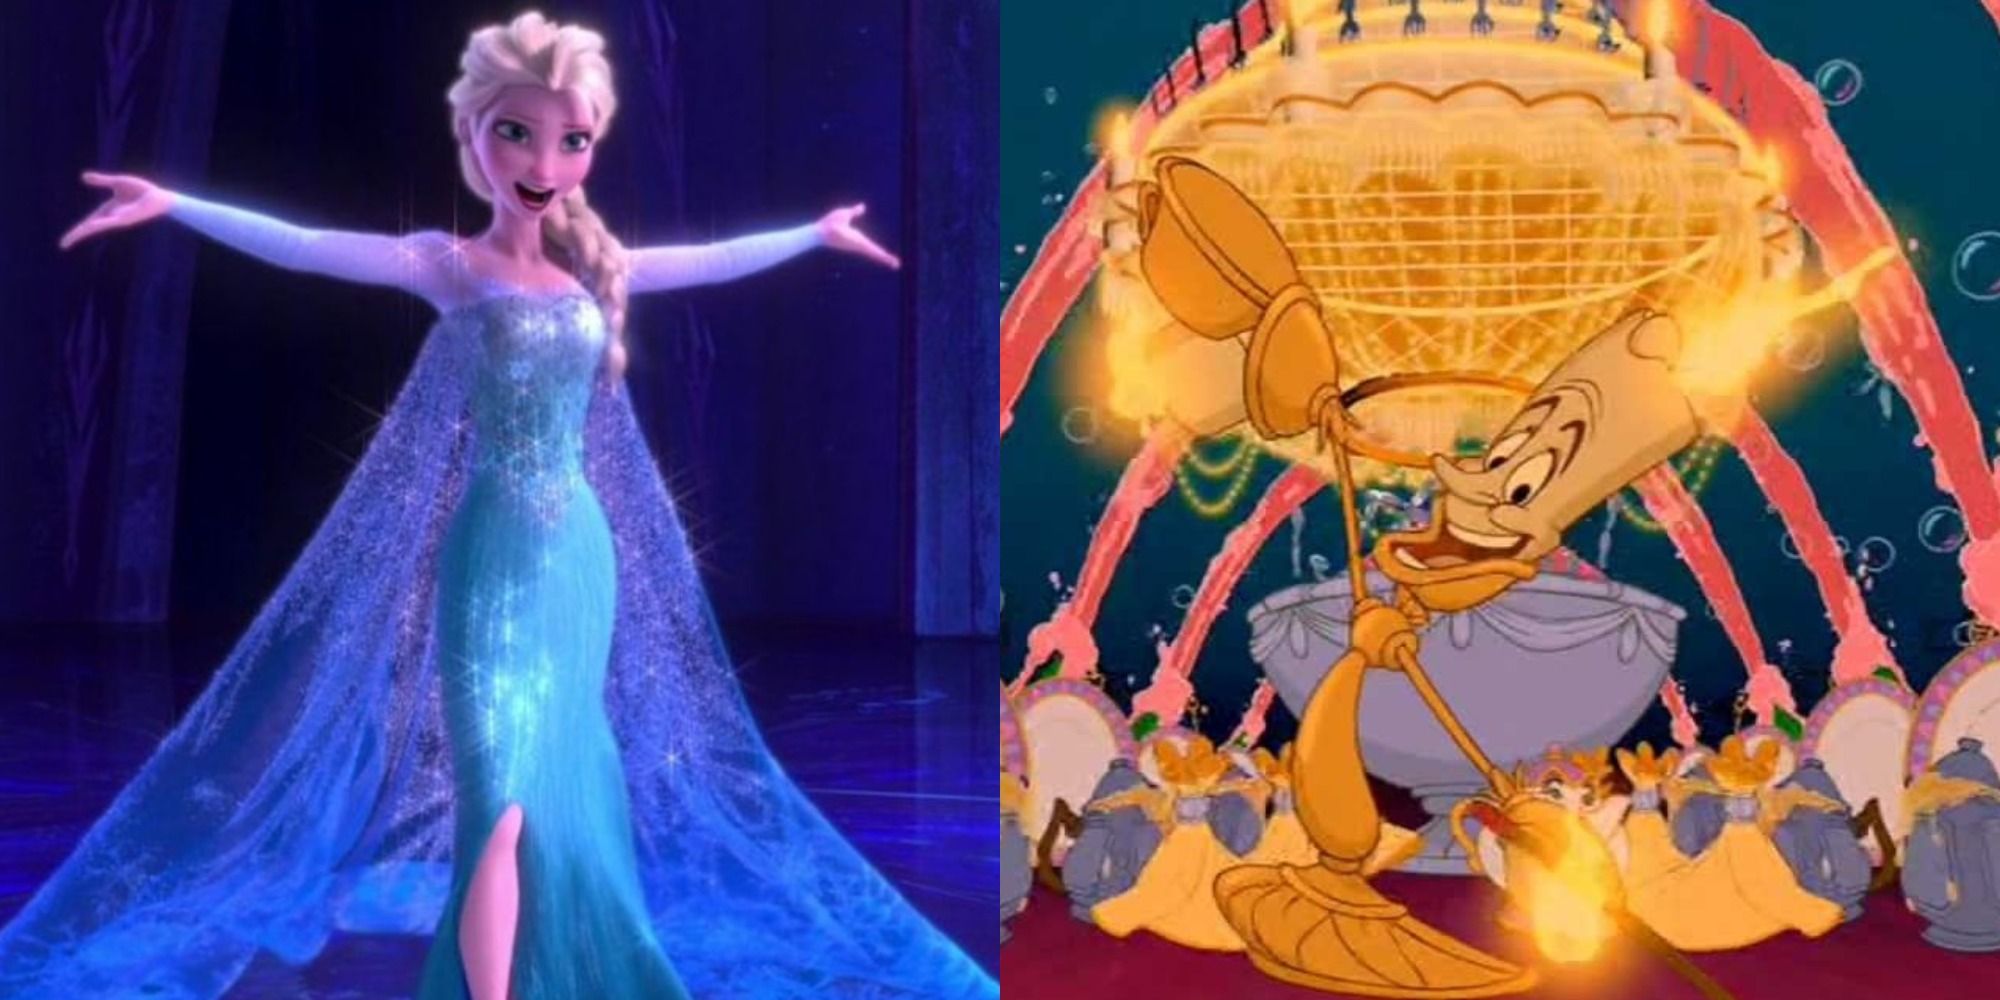 Split image of Frozen and Beauty and the Beast